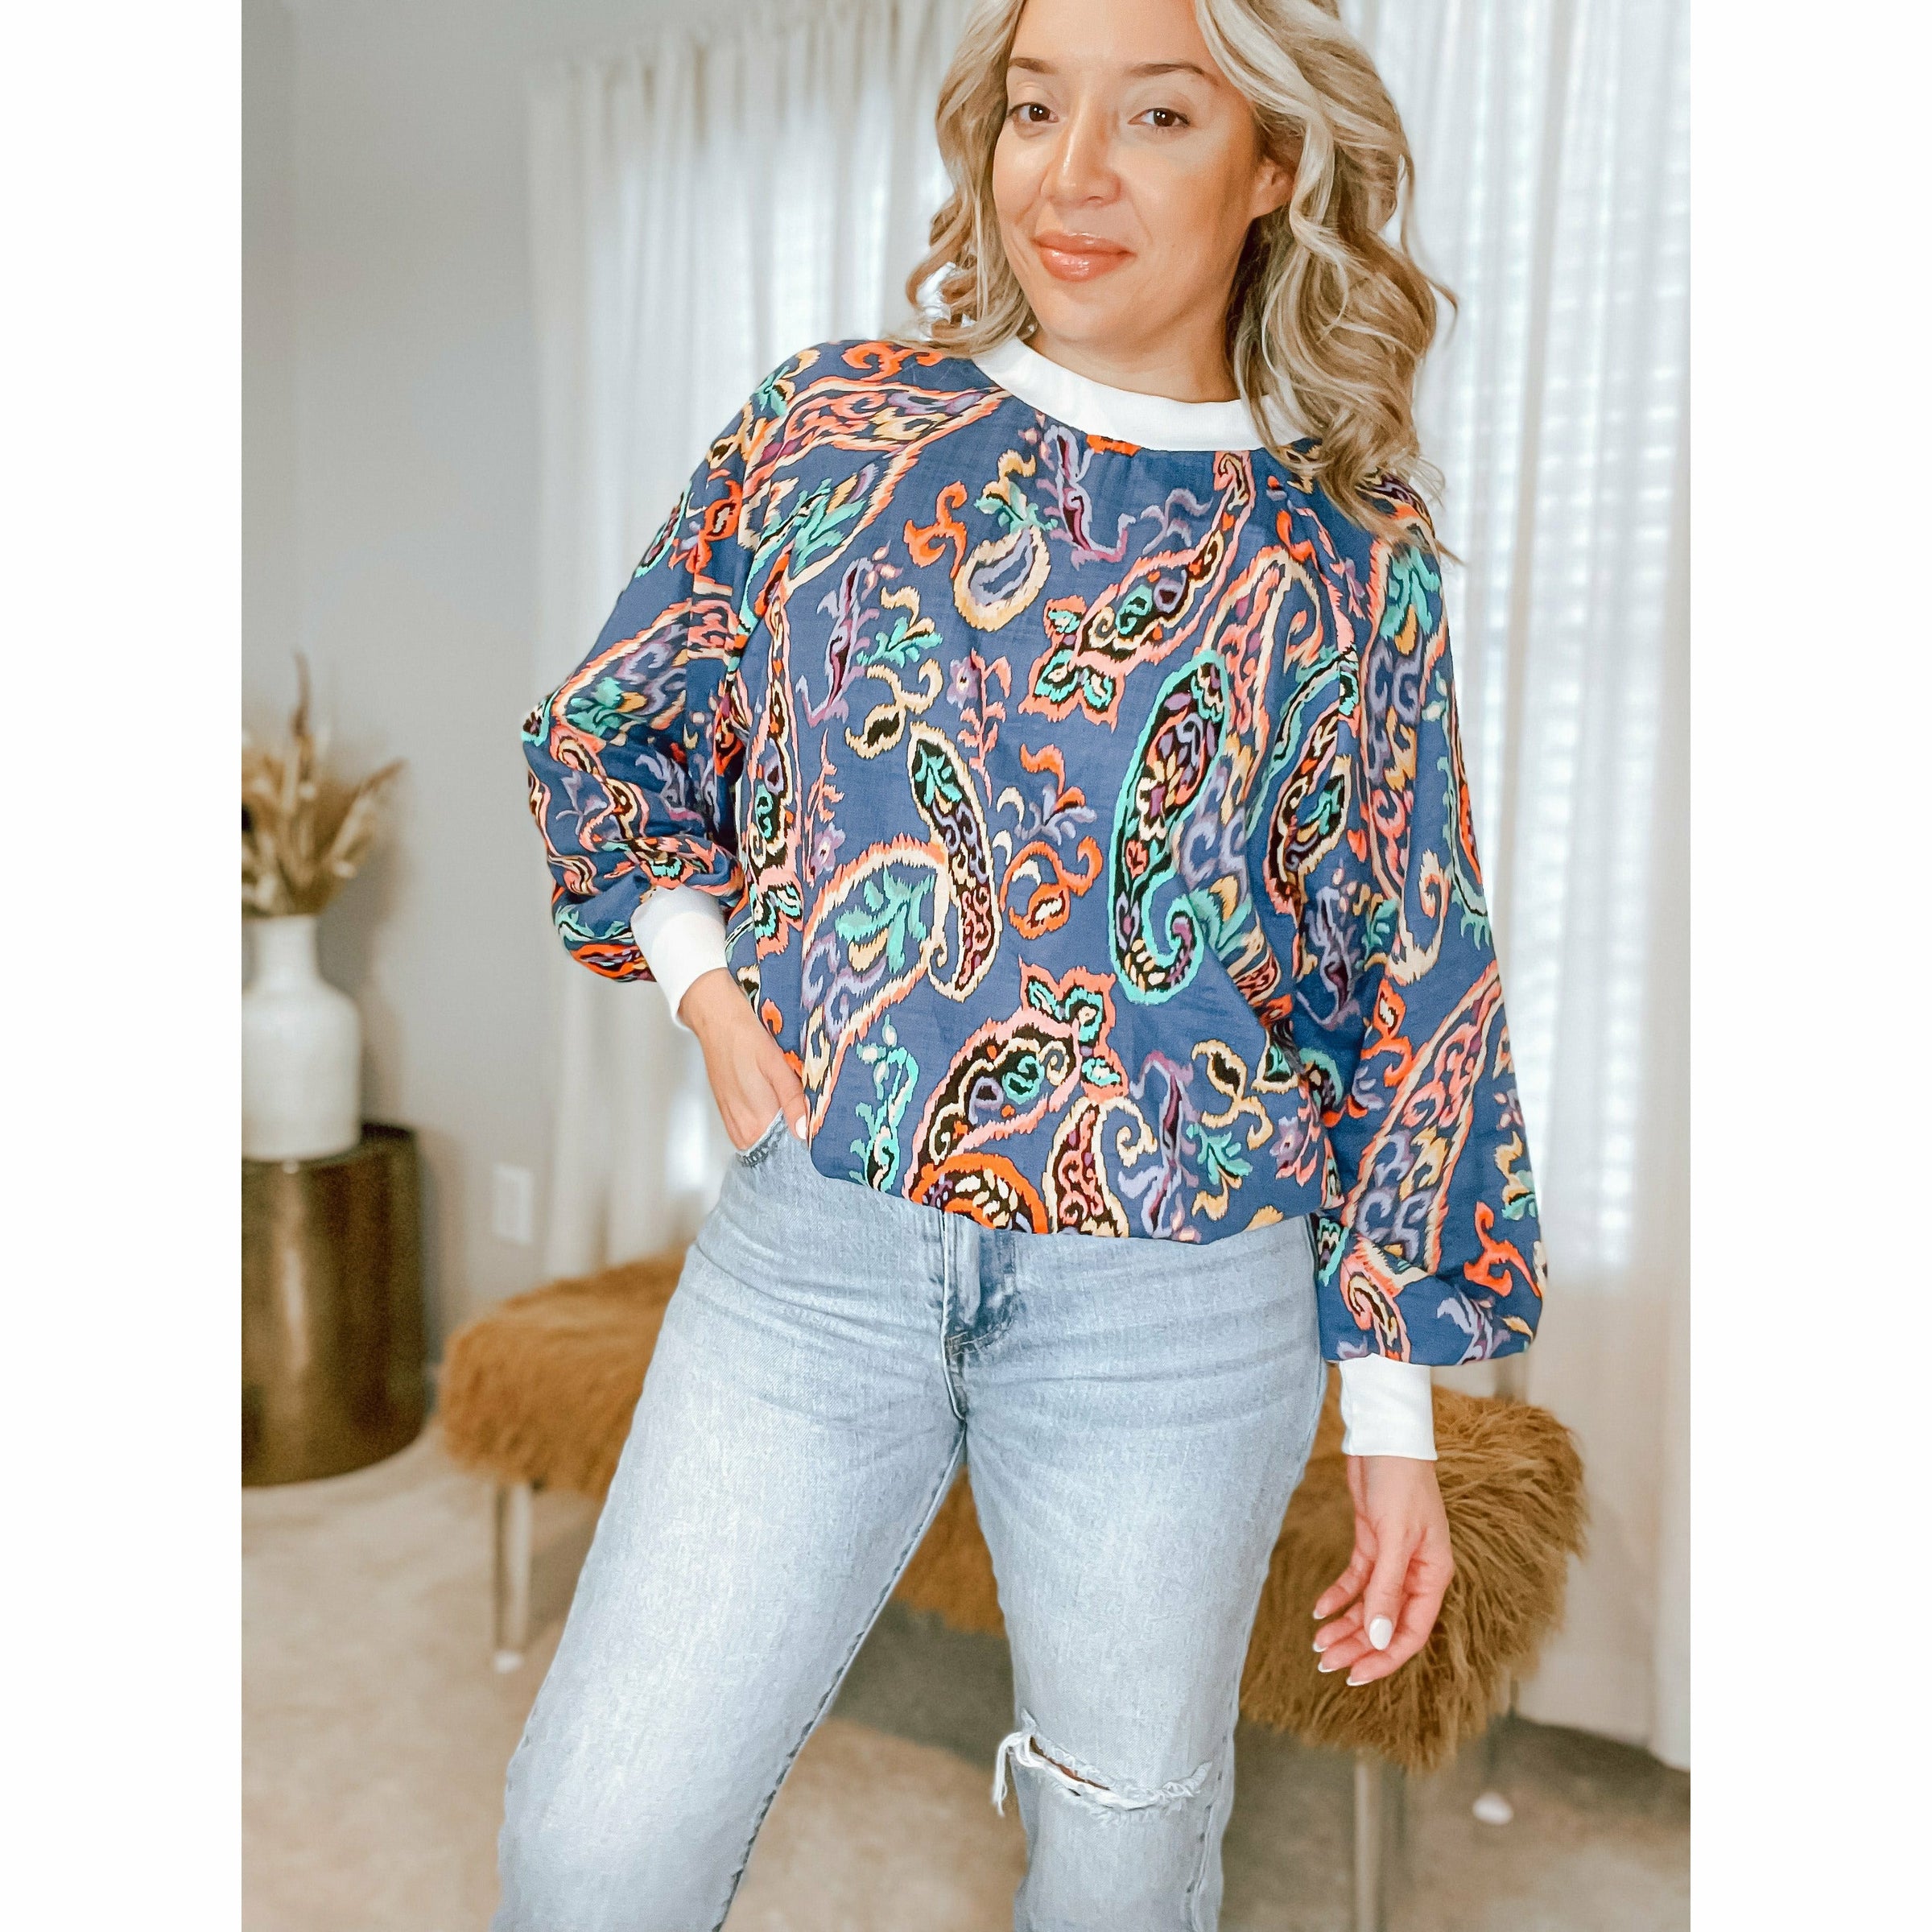 Barron Paisley Top - The Hive by Chris Jesselle